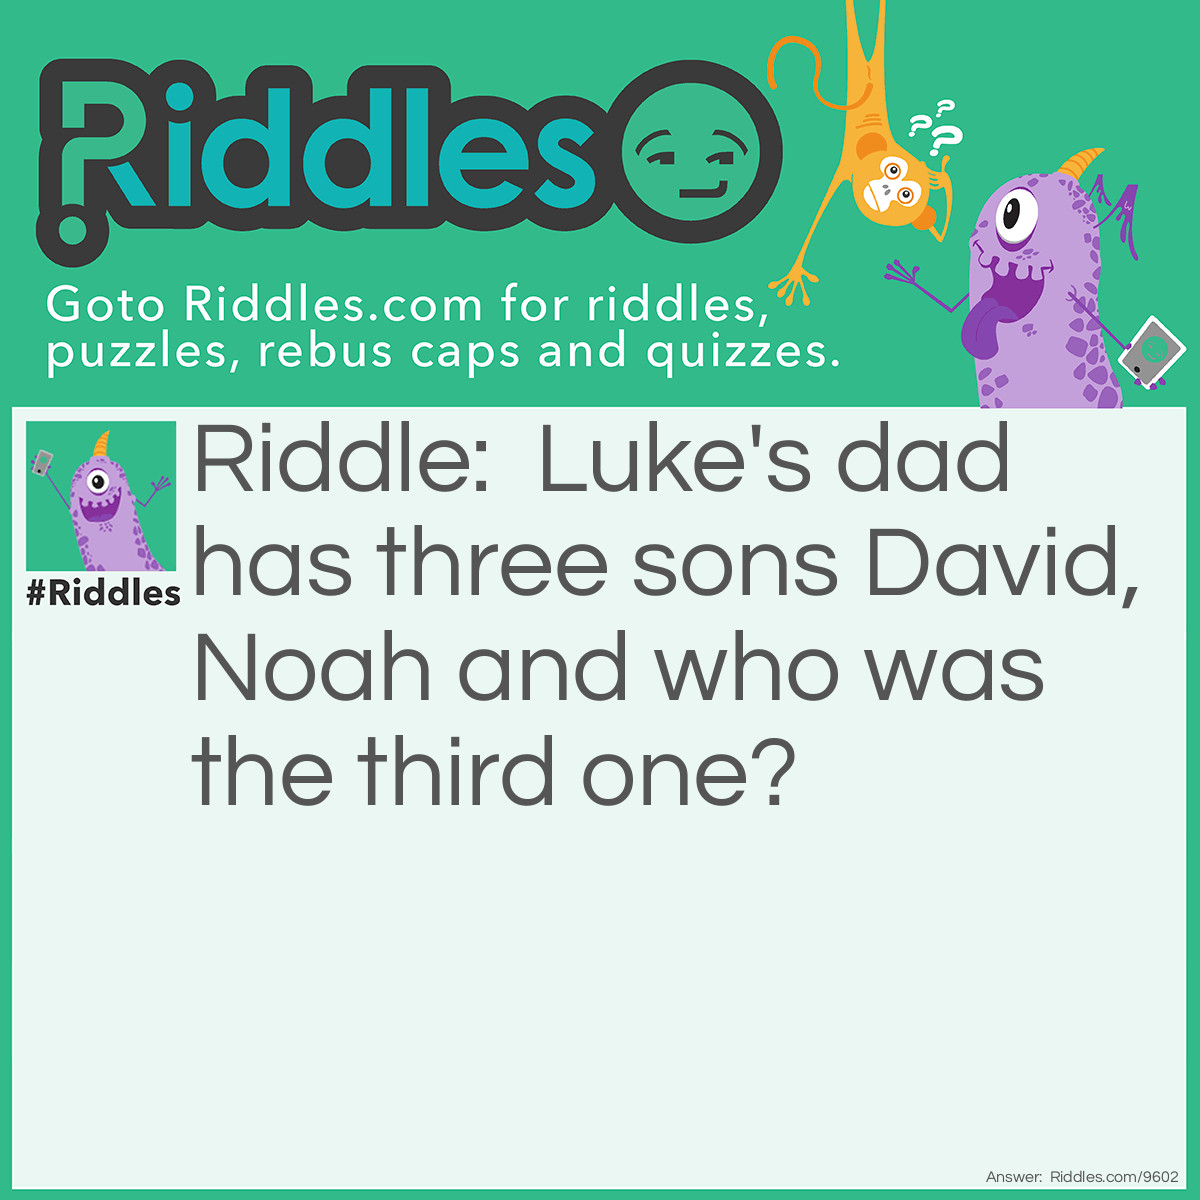 Riddle: Luke's dad has three sons David, Noah and who was the third one? Answer: Luke!